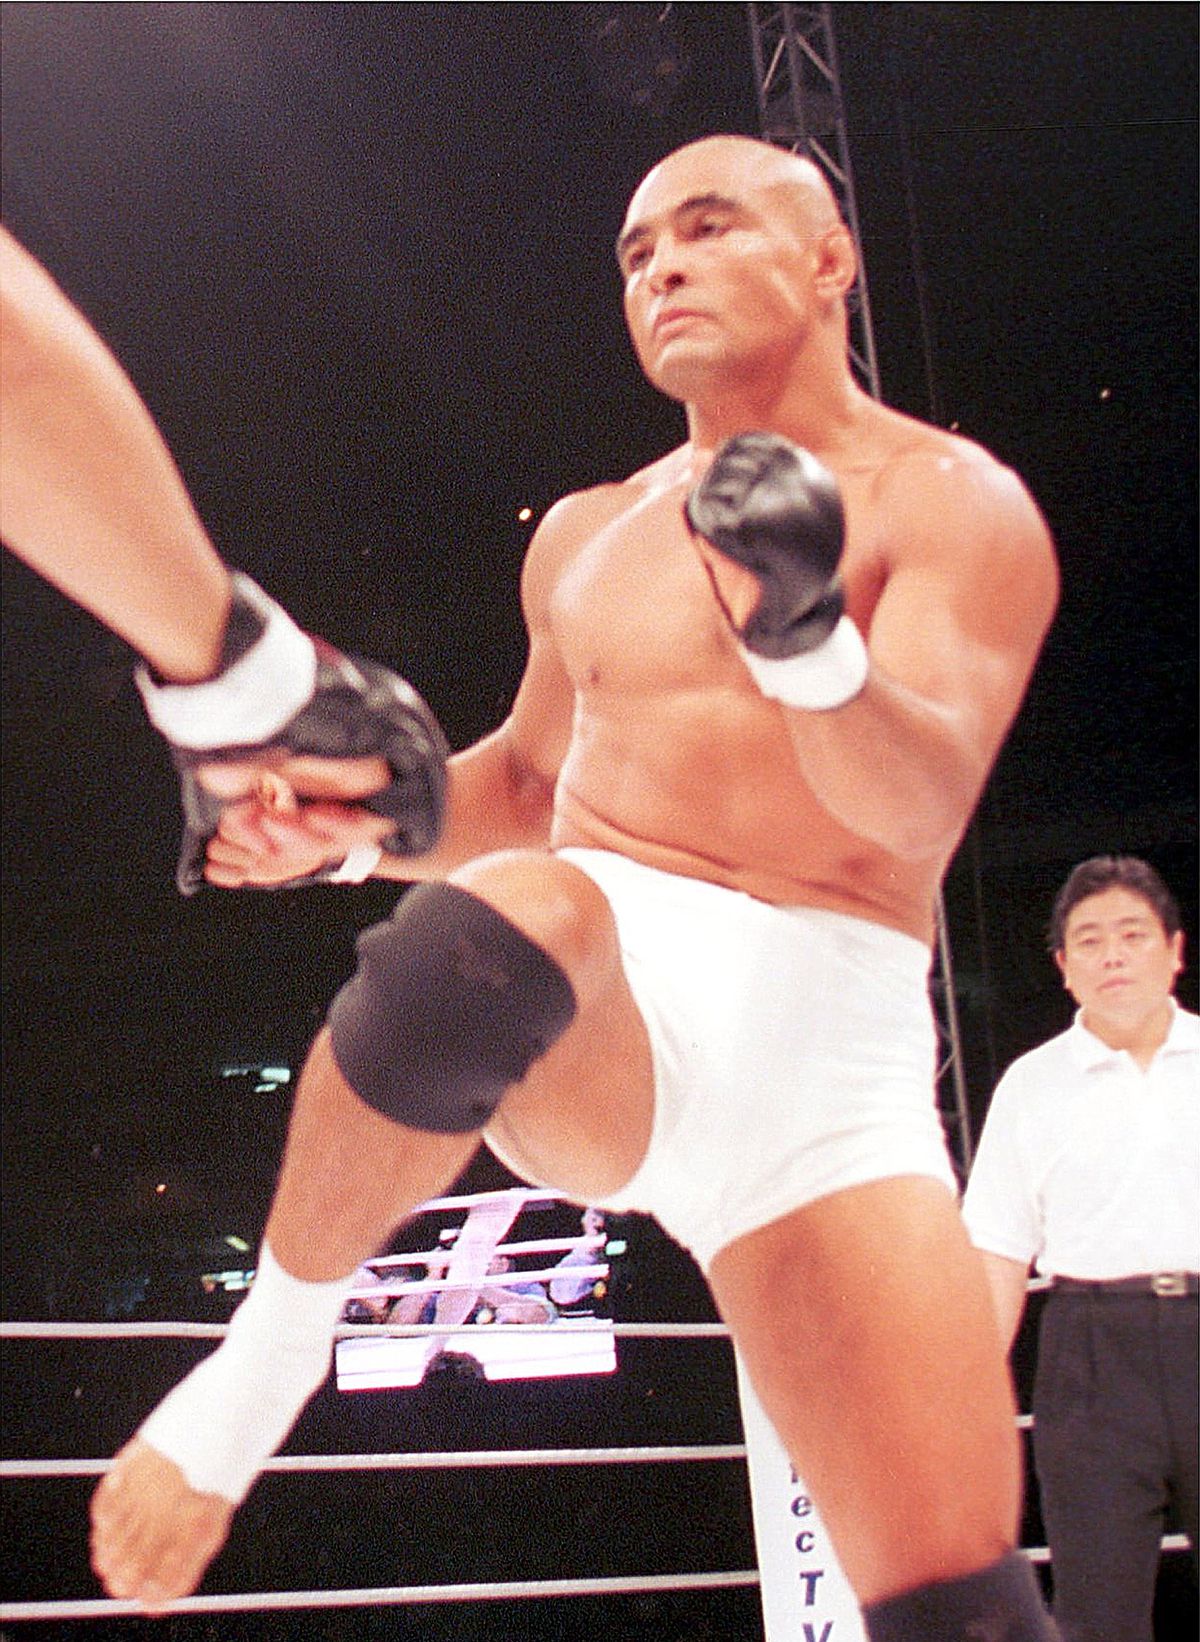 TOKYO, JAPAN - MAY 26: (JAPANESE NEWSPAPERS OUT) Rickson Gracie competes in the match against Masakatsu Funaki during the Colosseum 2000 at Tokyo Dome on May 26, 2000 in Tokyo, Japan.